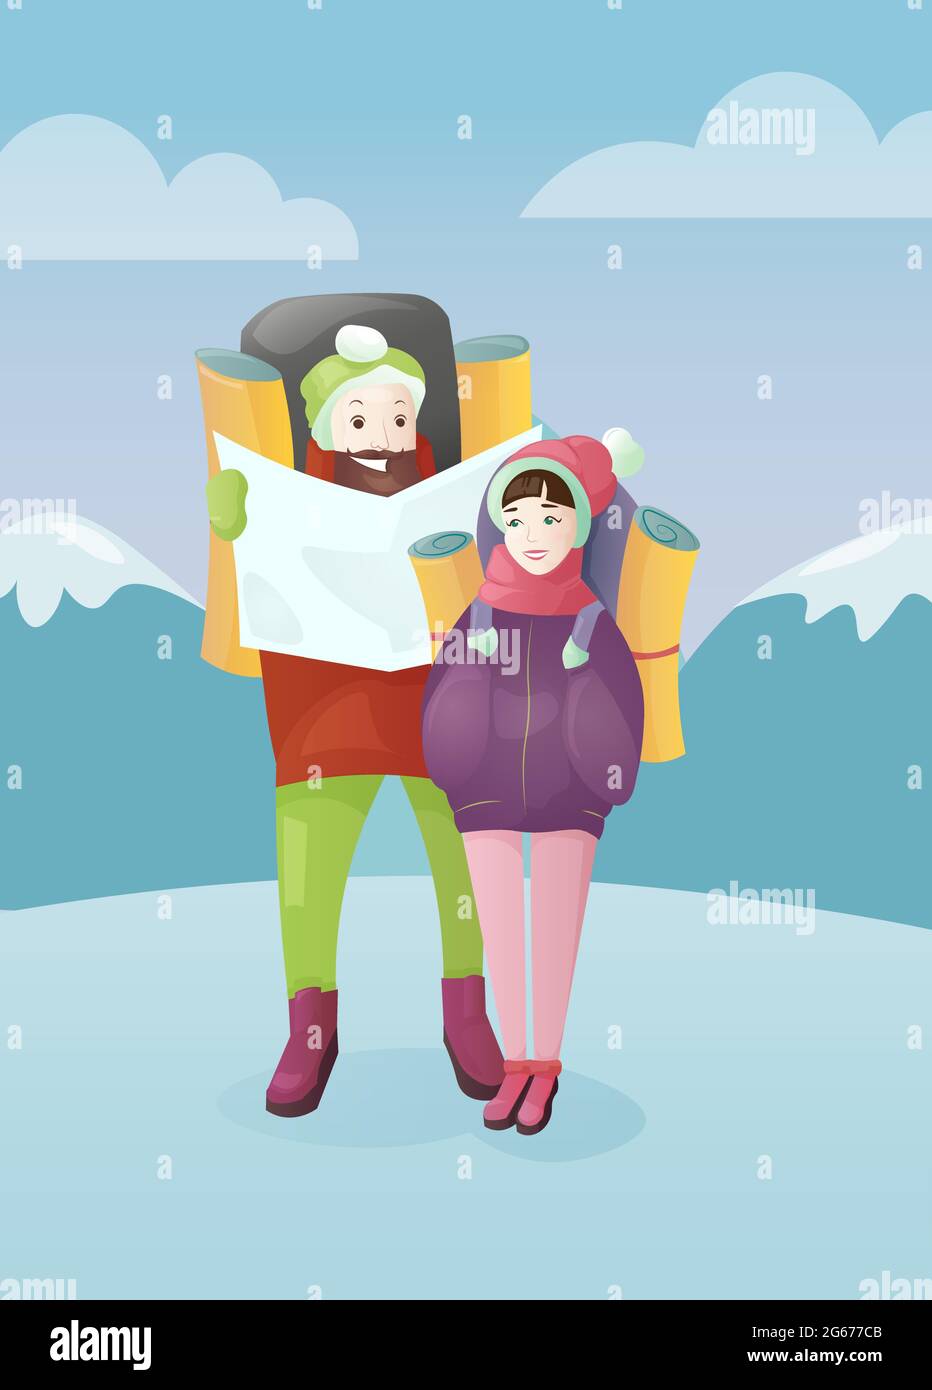 Vector illustration young couple with travel bag and map on winter mountains background. Traveling concept, man and woman in cartoon flat style. Stock Vector